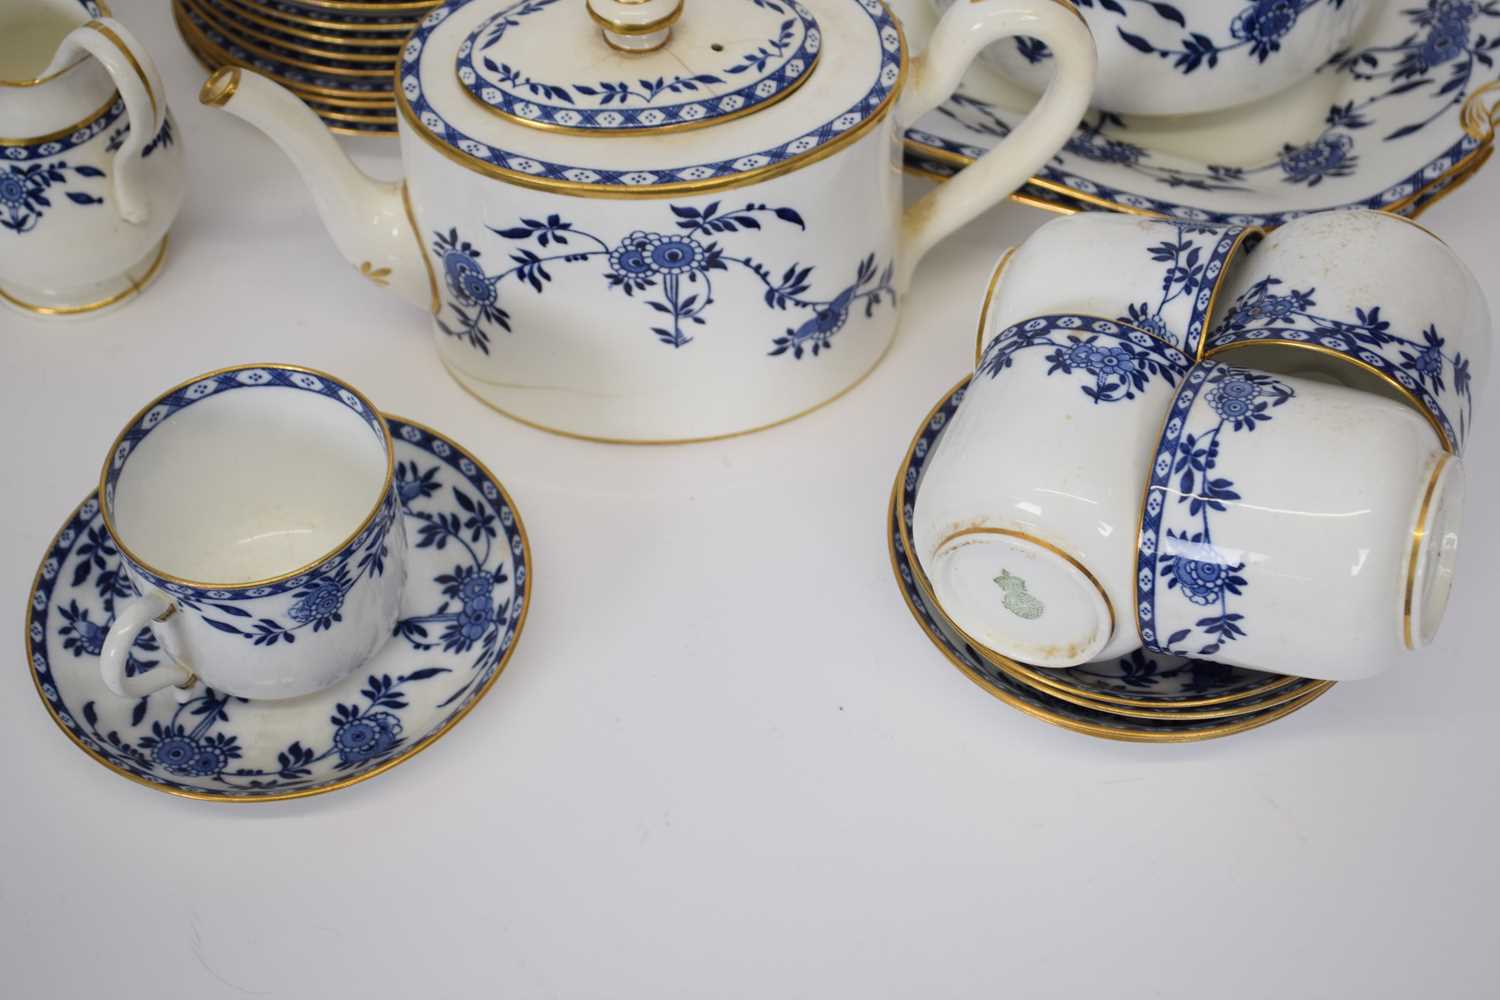 Extensive late 19th century Minton tea set all decorated in the Delft pattern including 12 cups, - Image 2 of 5